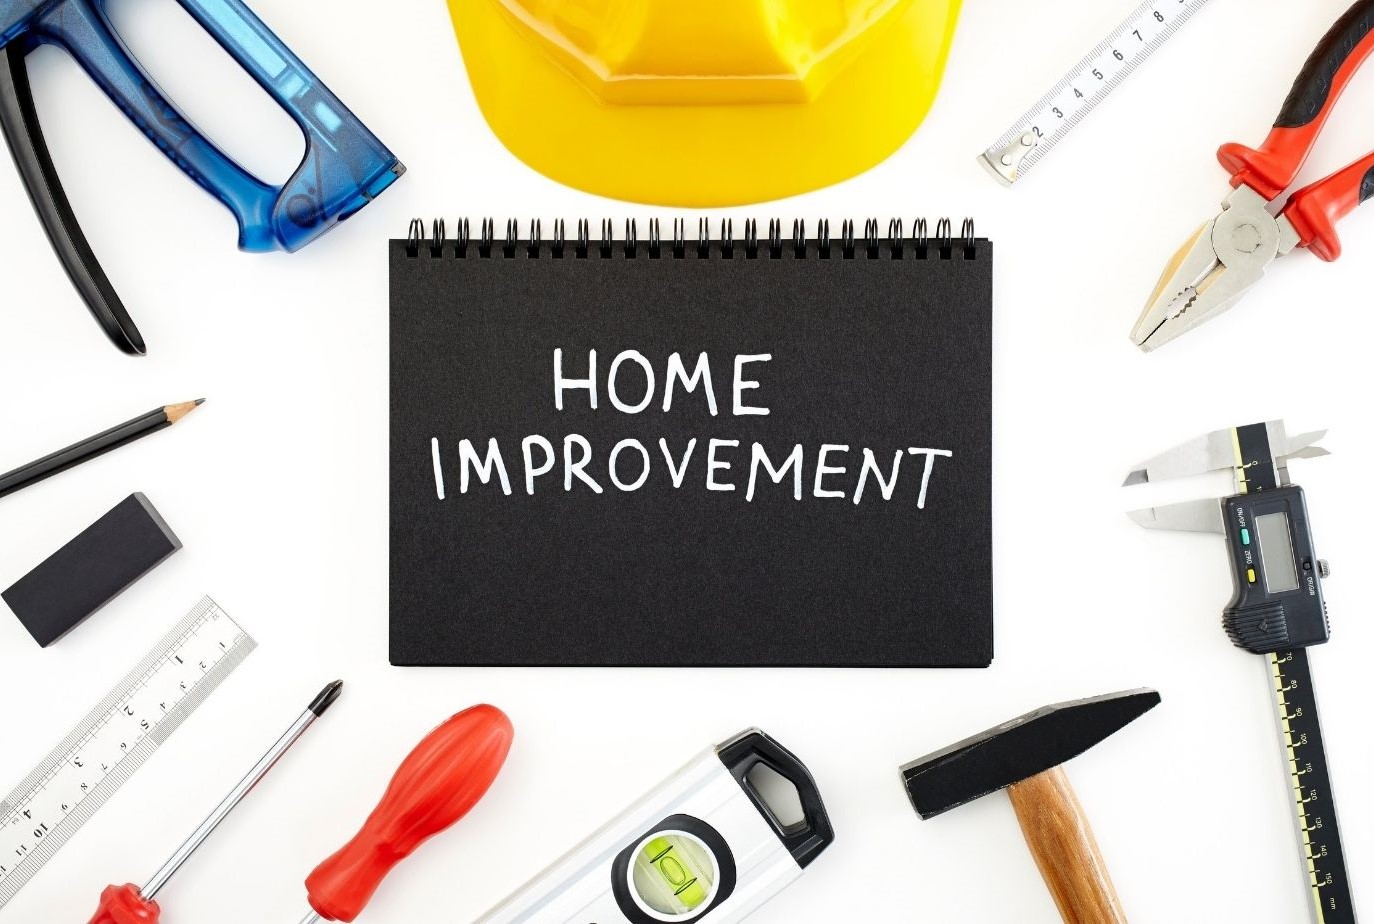 Fall Home Improvements to WOW Buyers!